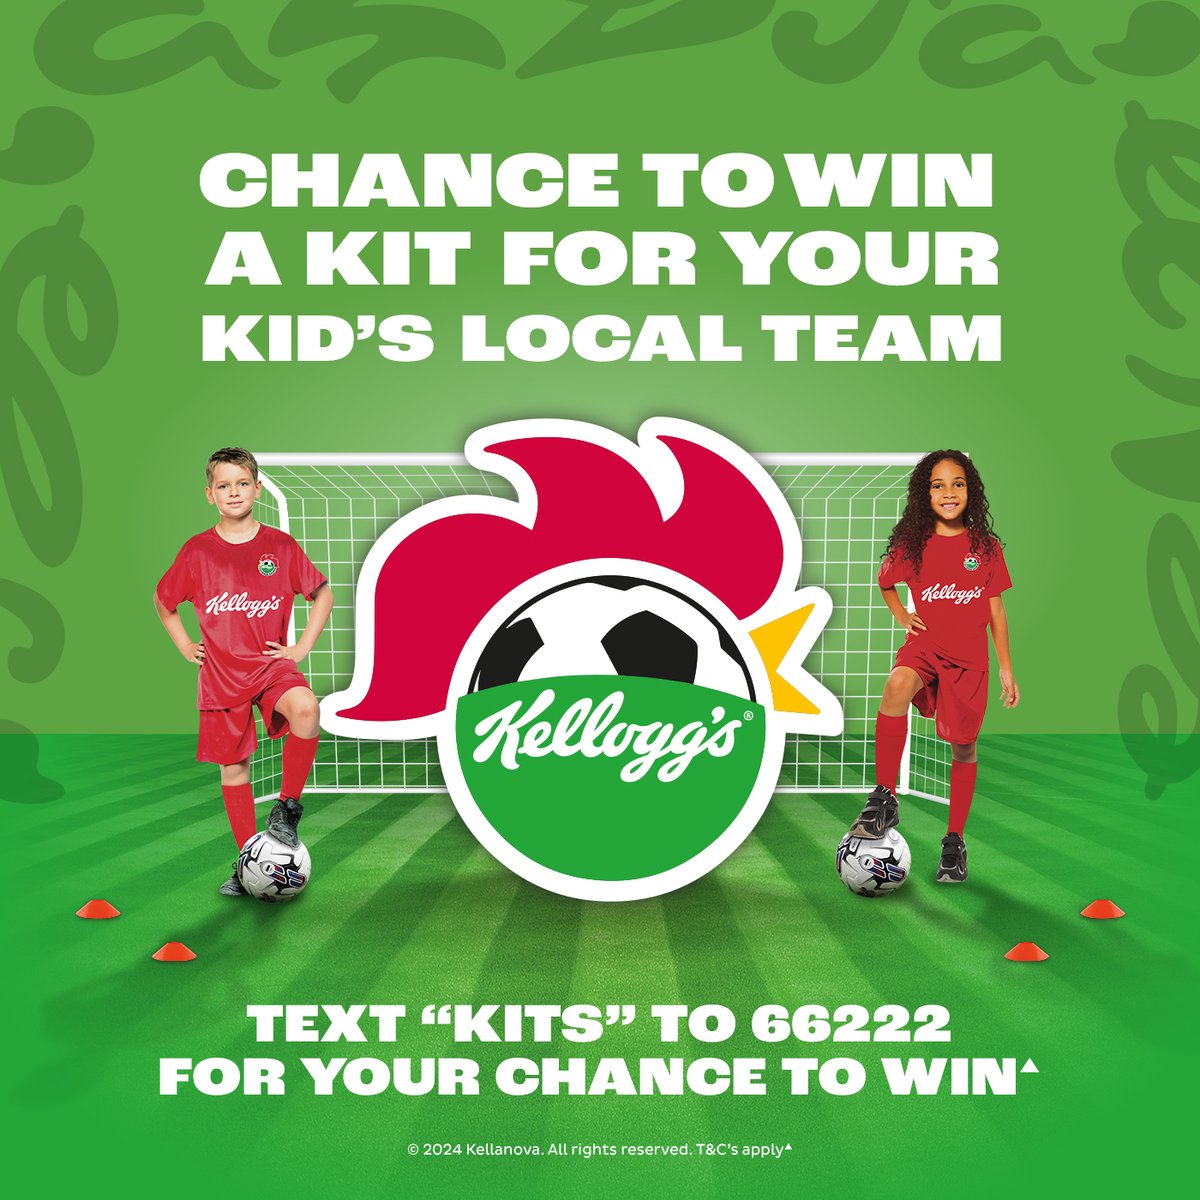 Get the CHANCE TO WIN a kit for your kid's local team with Kellogg's 👕